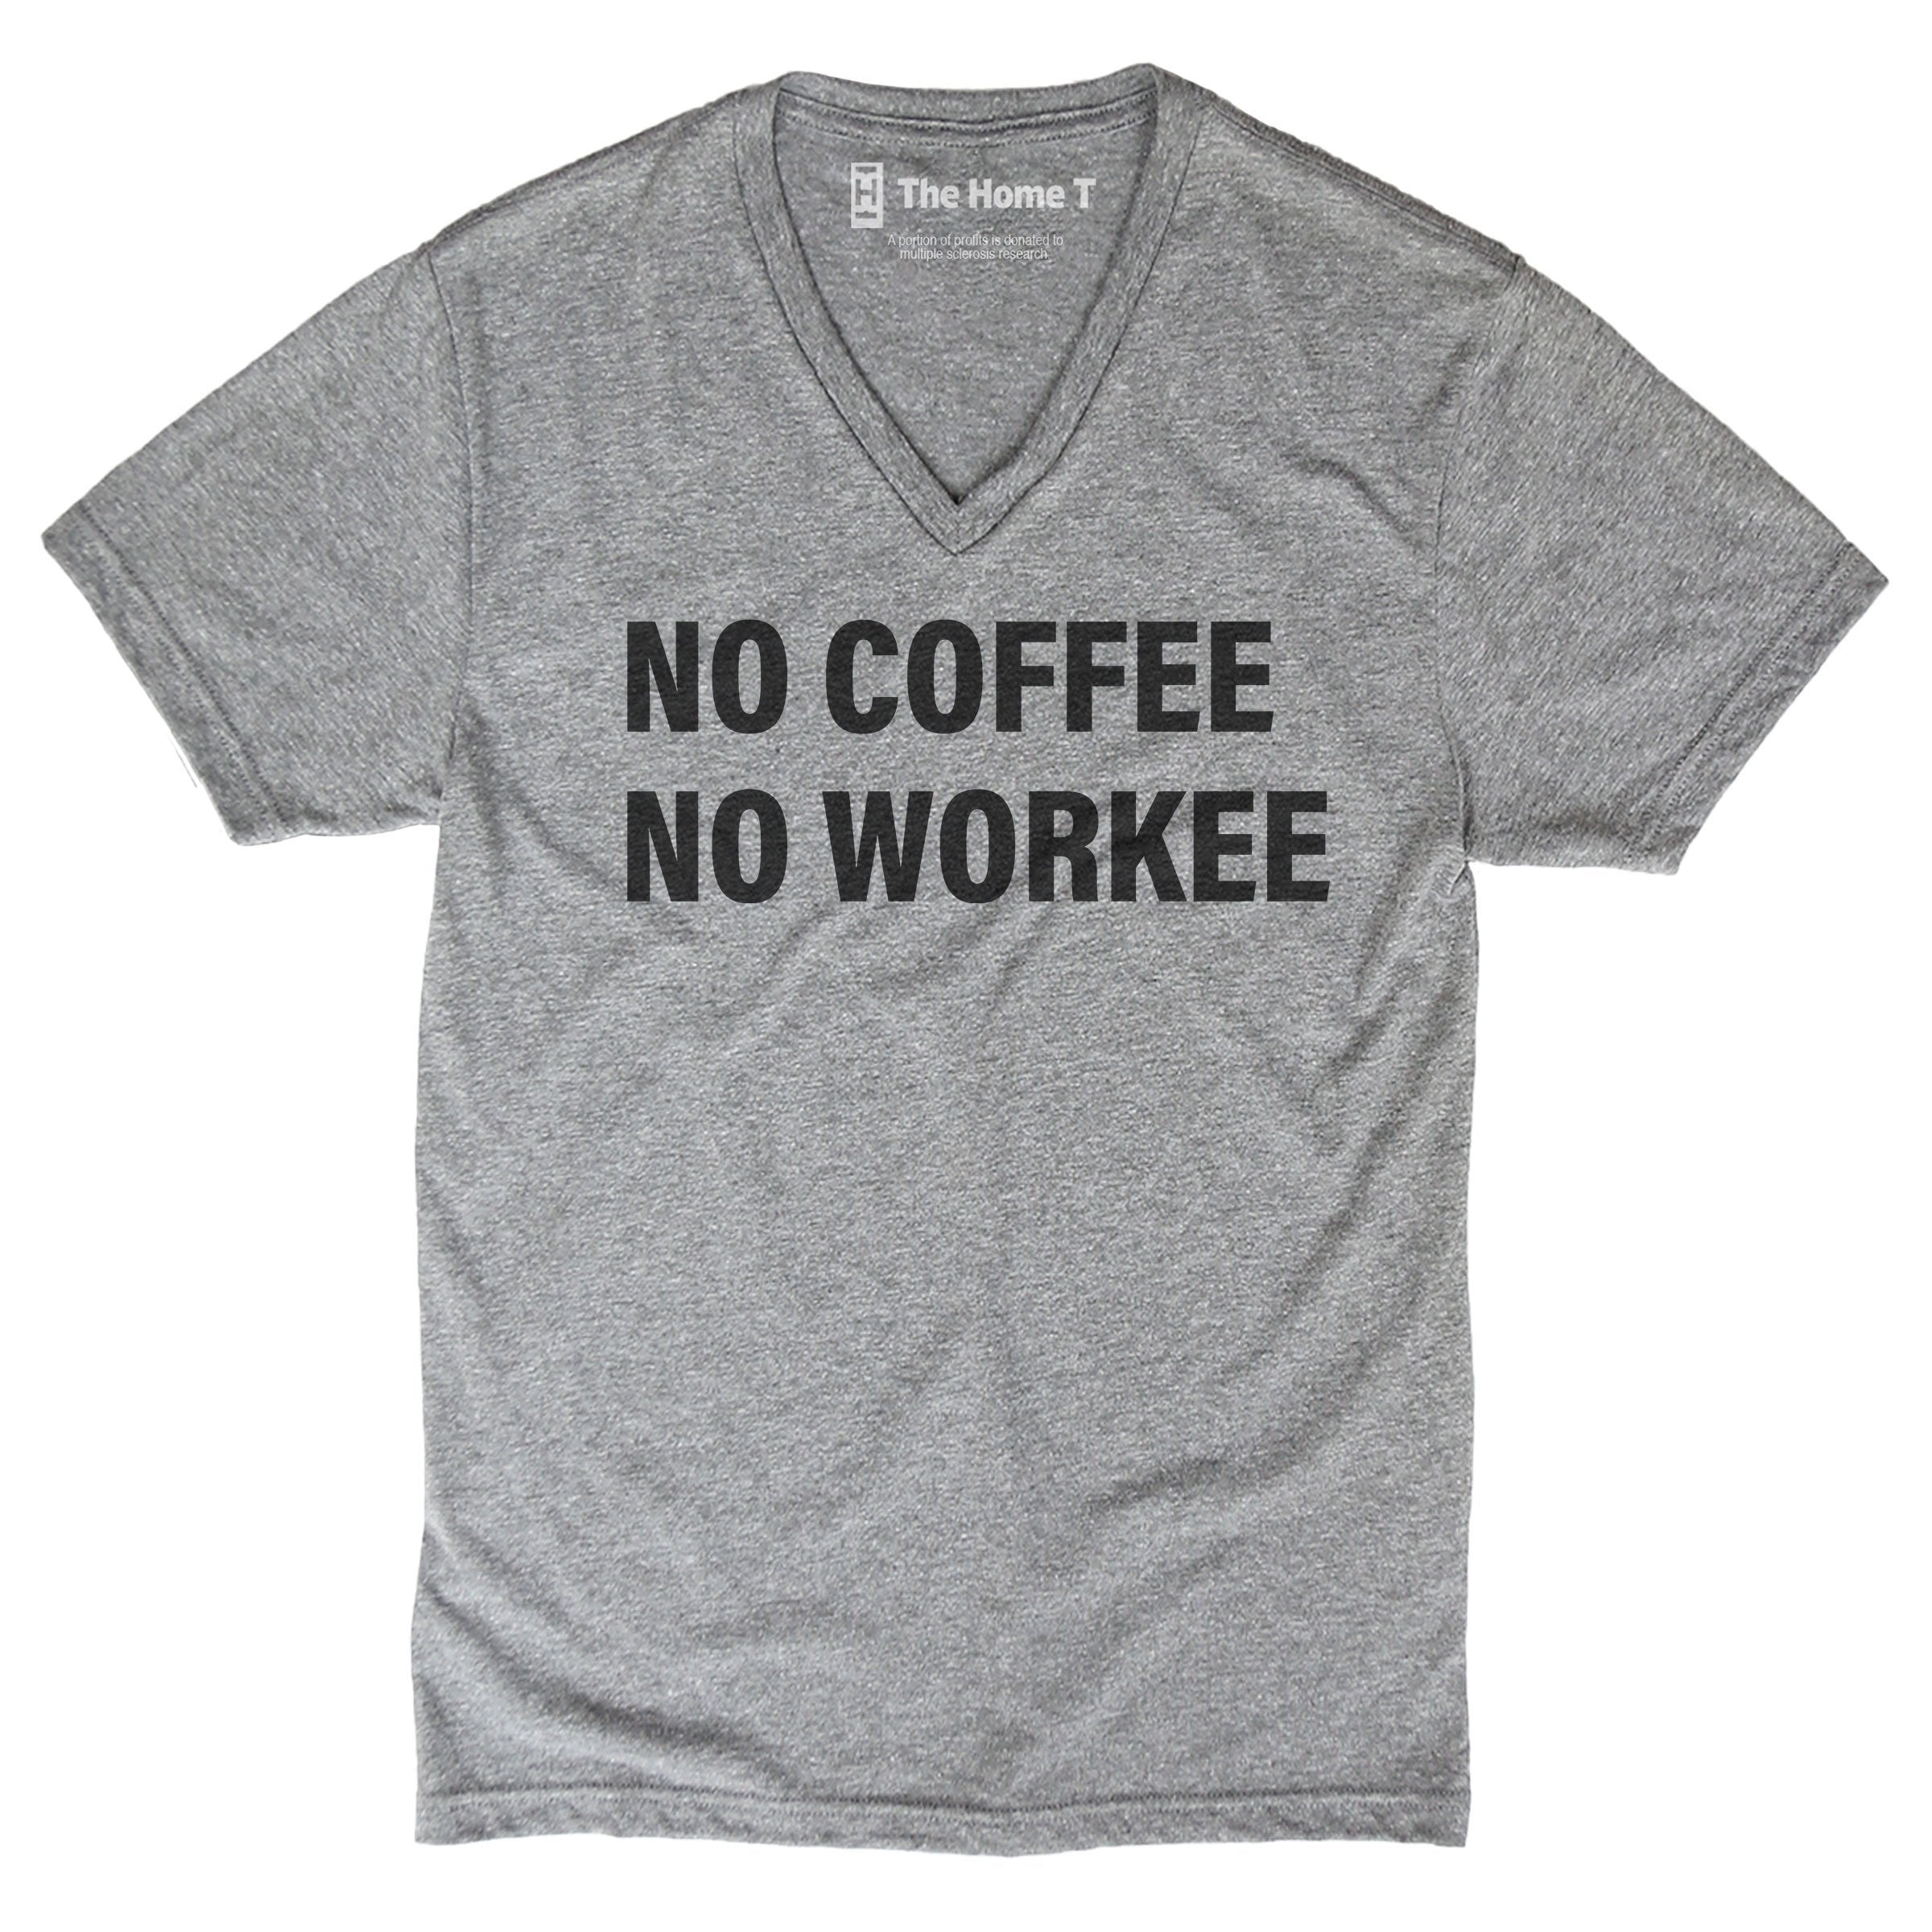 No Coffee No Workee The Home T XS VNECK Athletic Grey